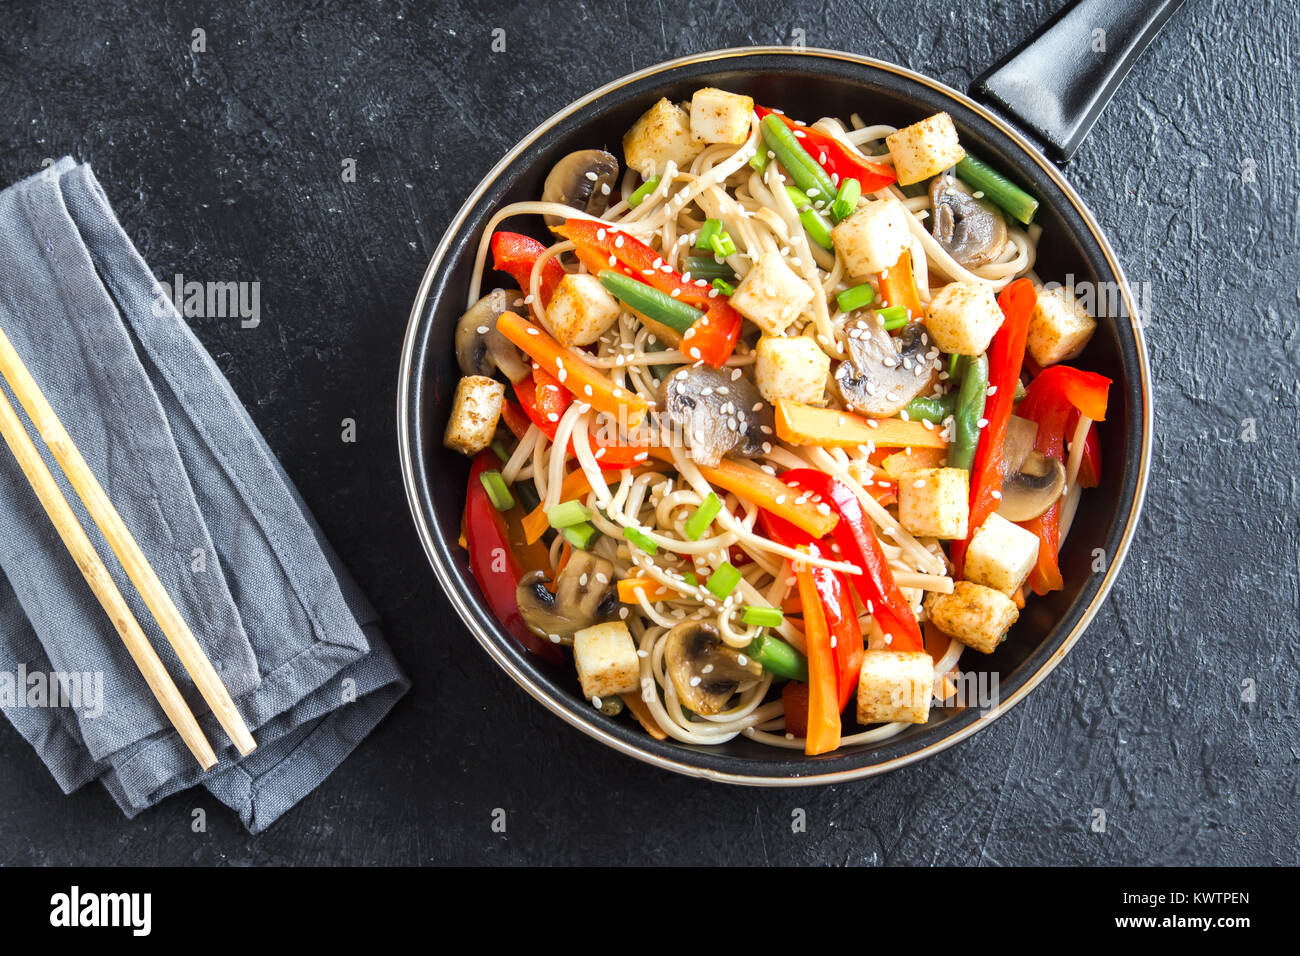 Stir fry with udon noodles, tofu, mushrooms and vegetables. Asian vegan  vegetarian food, meal, stir fry in wok over black background, copy space  Stock Photo - Alamy